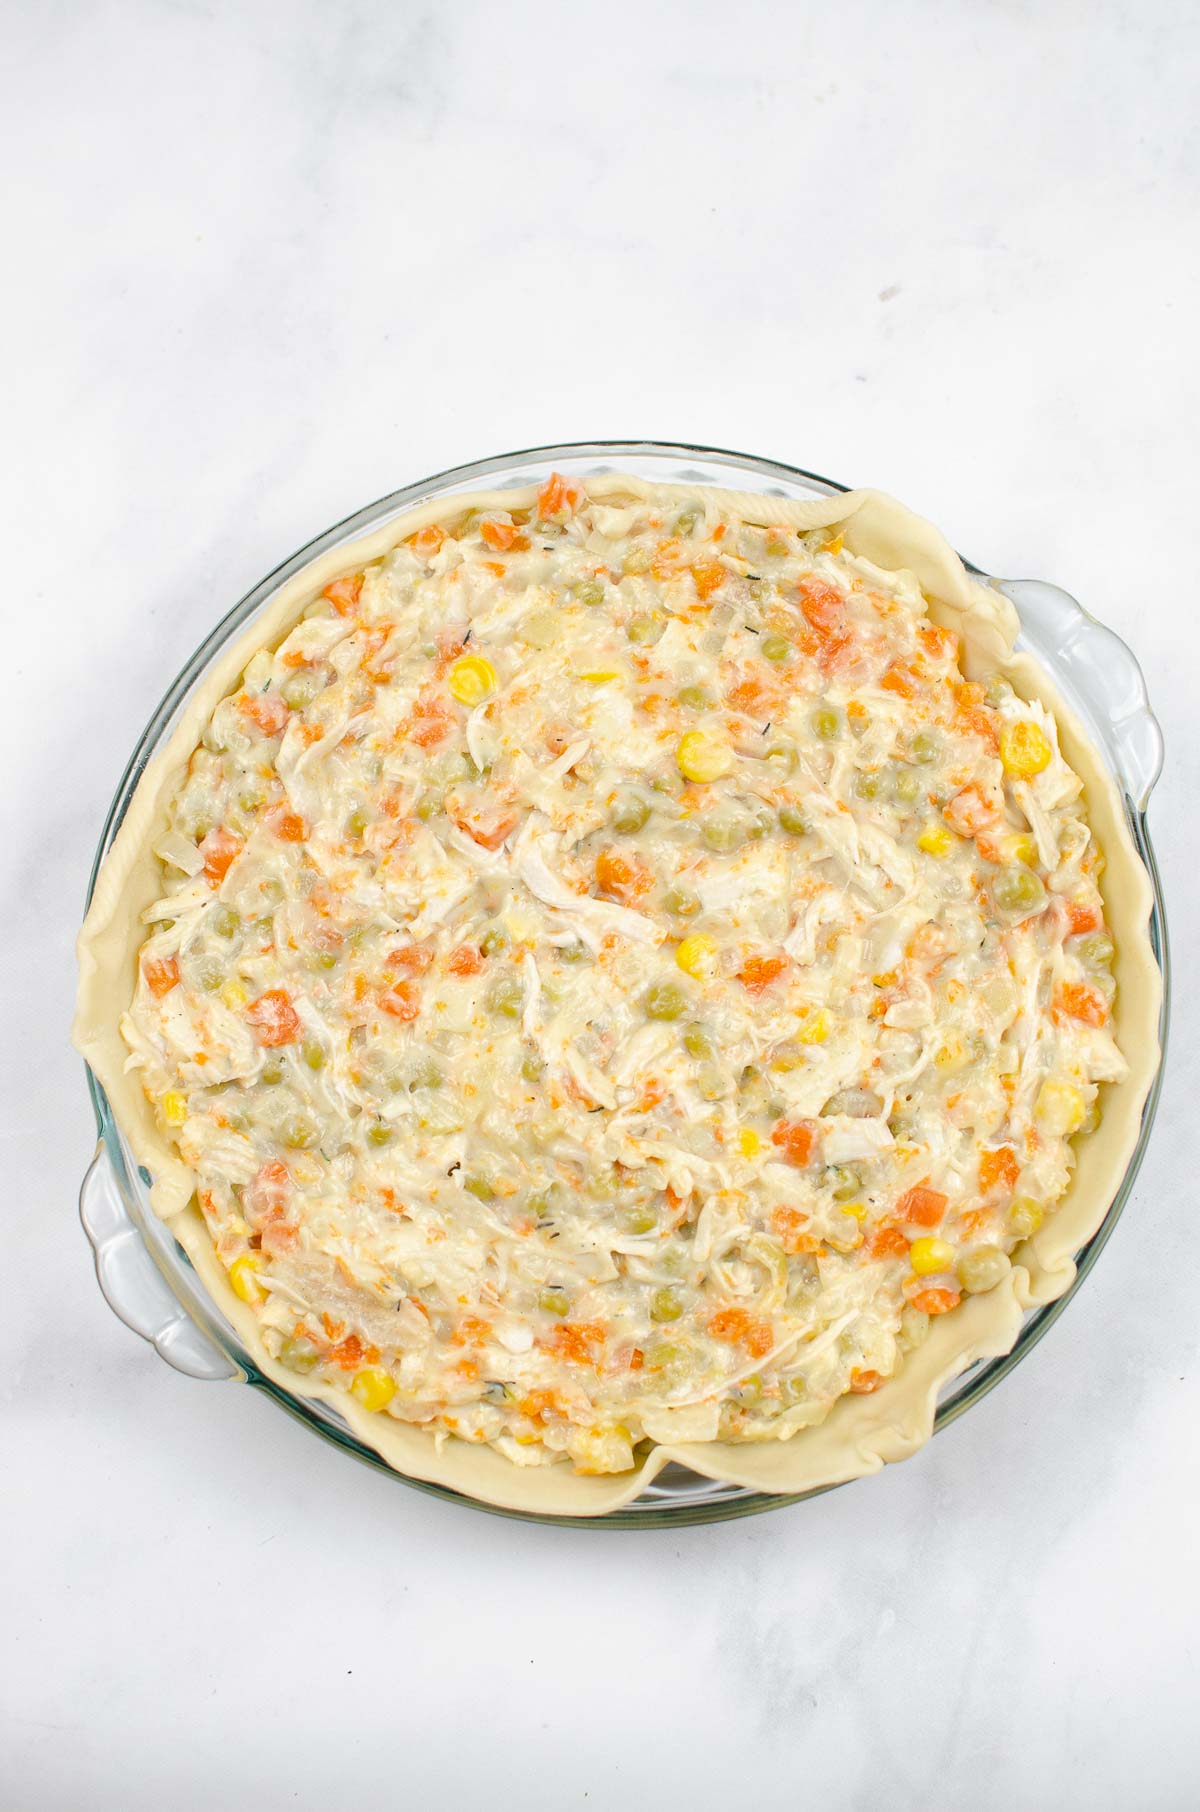 Uncooked turkey pot pie with filling in a pie dish.